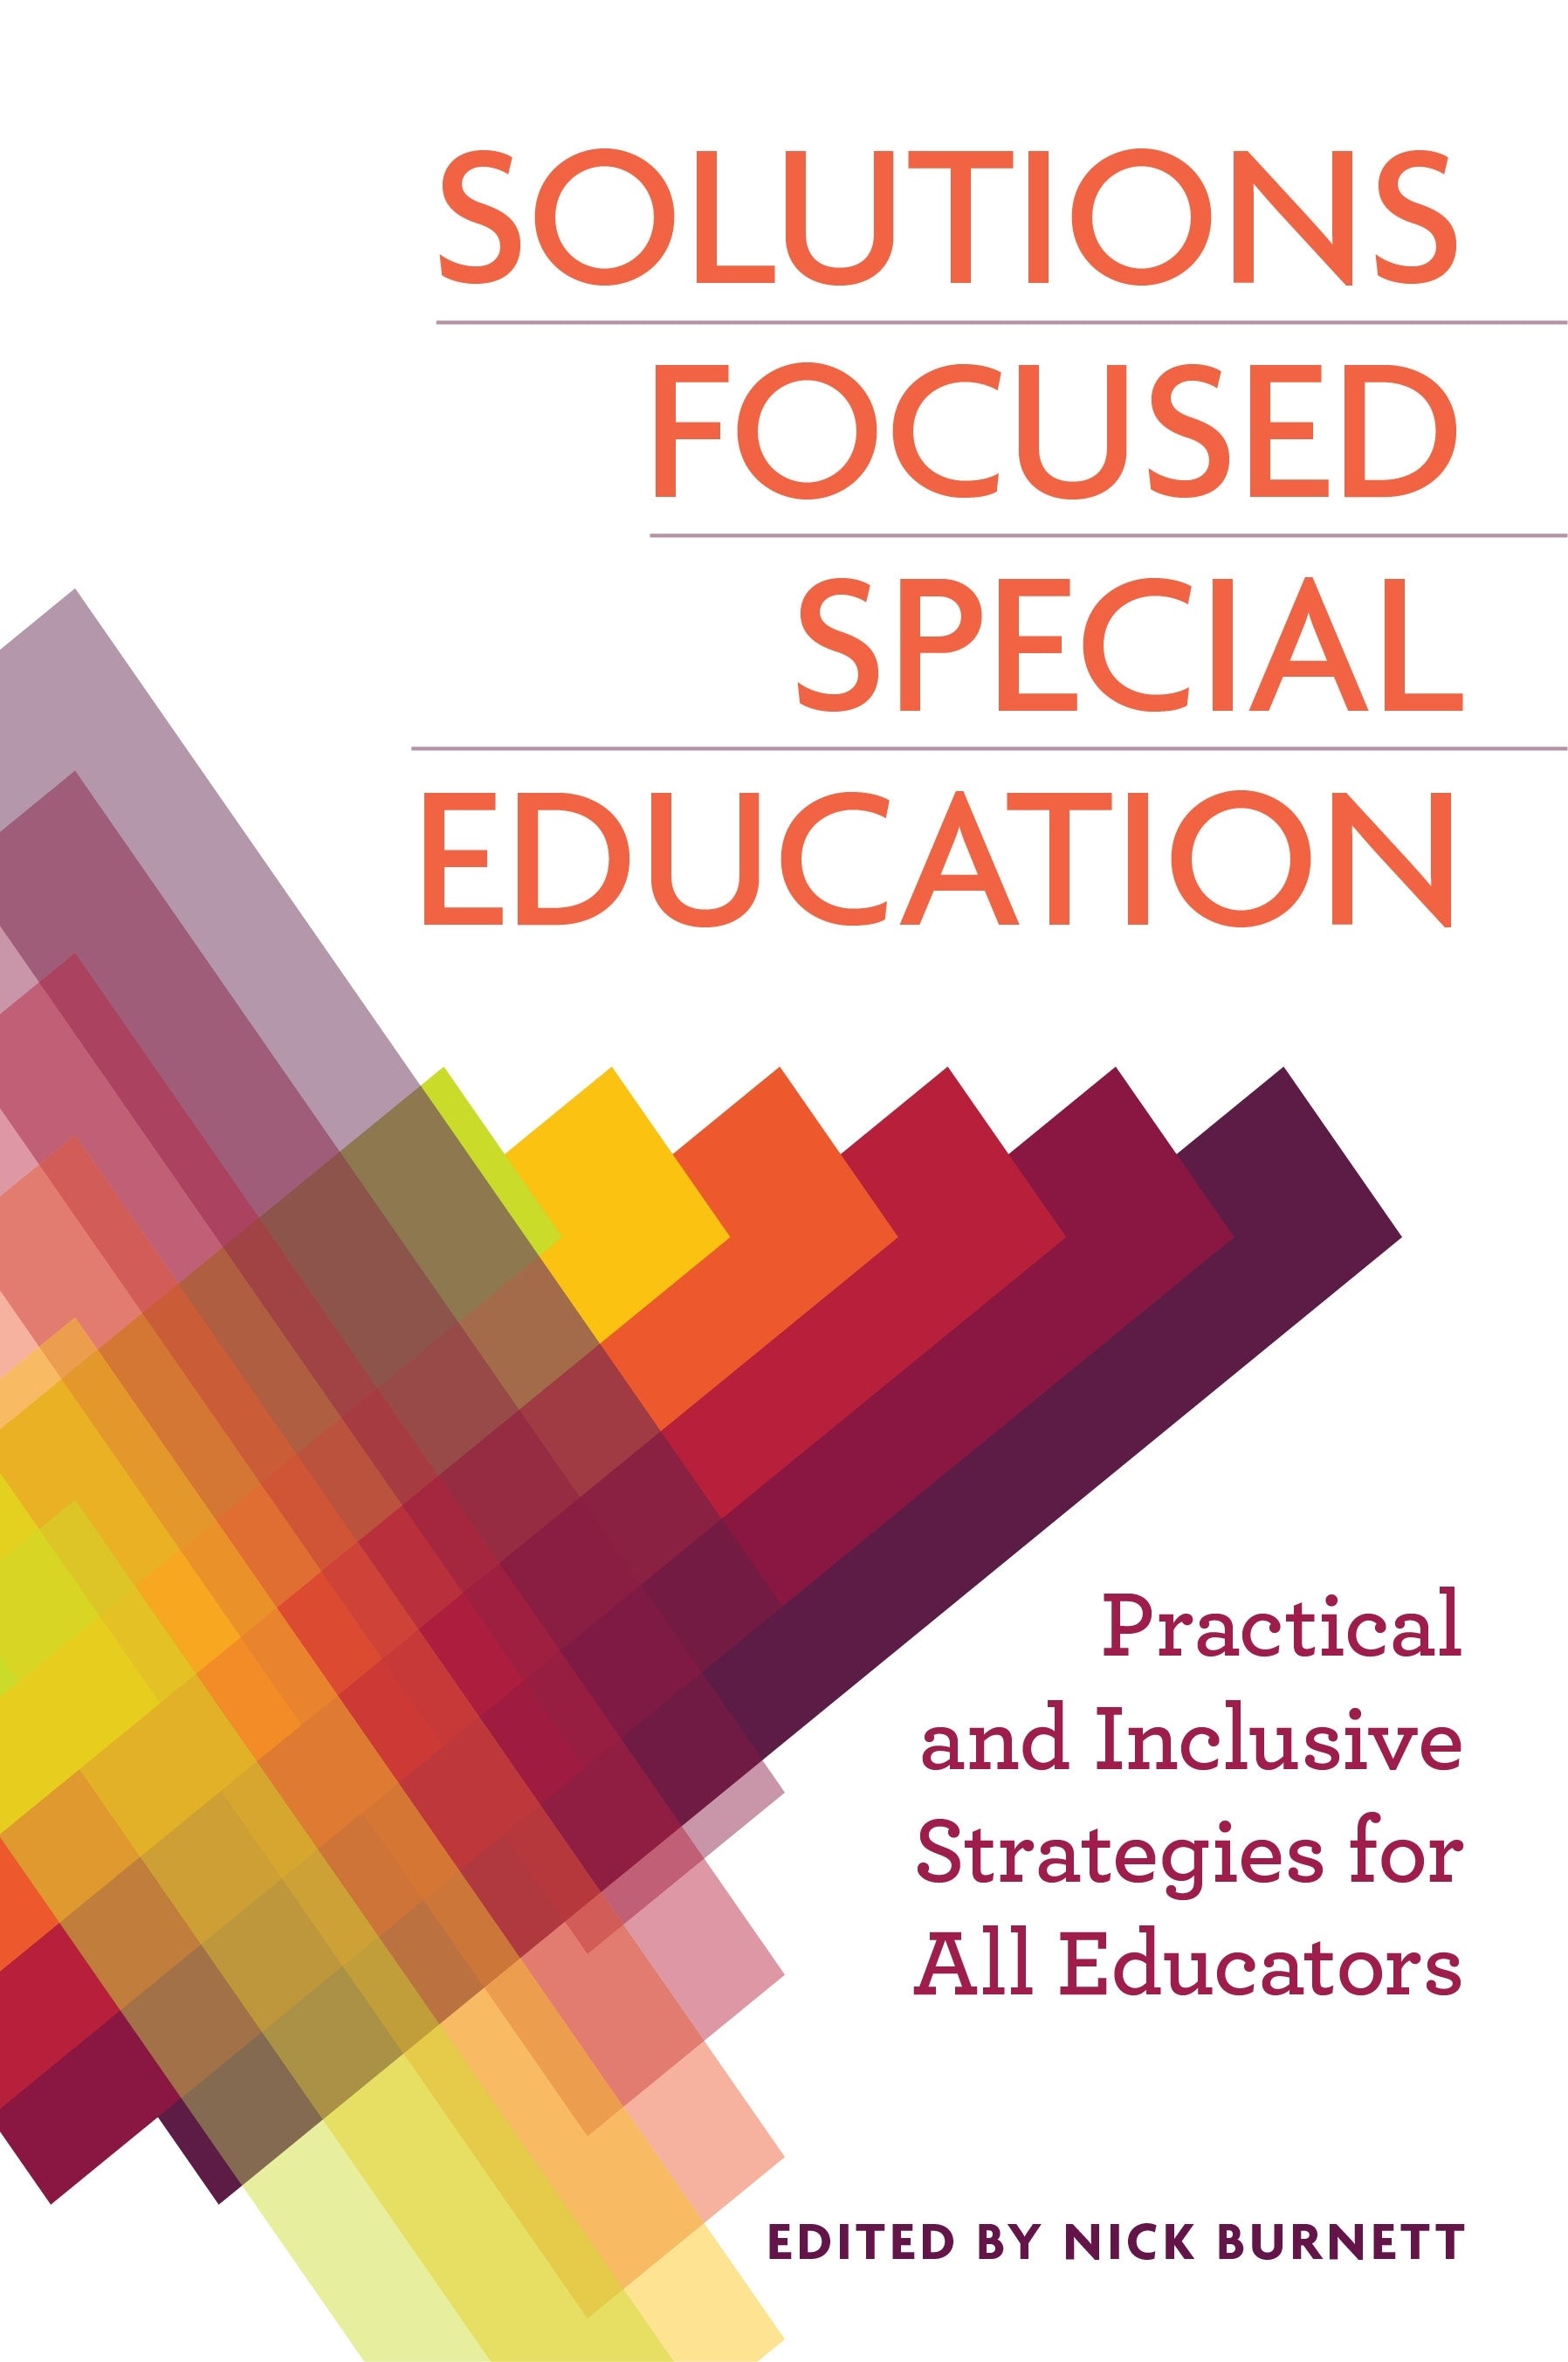 Solutions Focused Special Education by Nicholas Burnett, No Author Listed